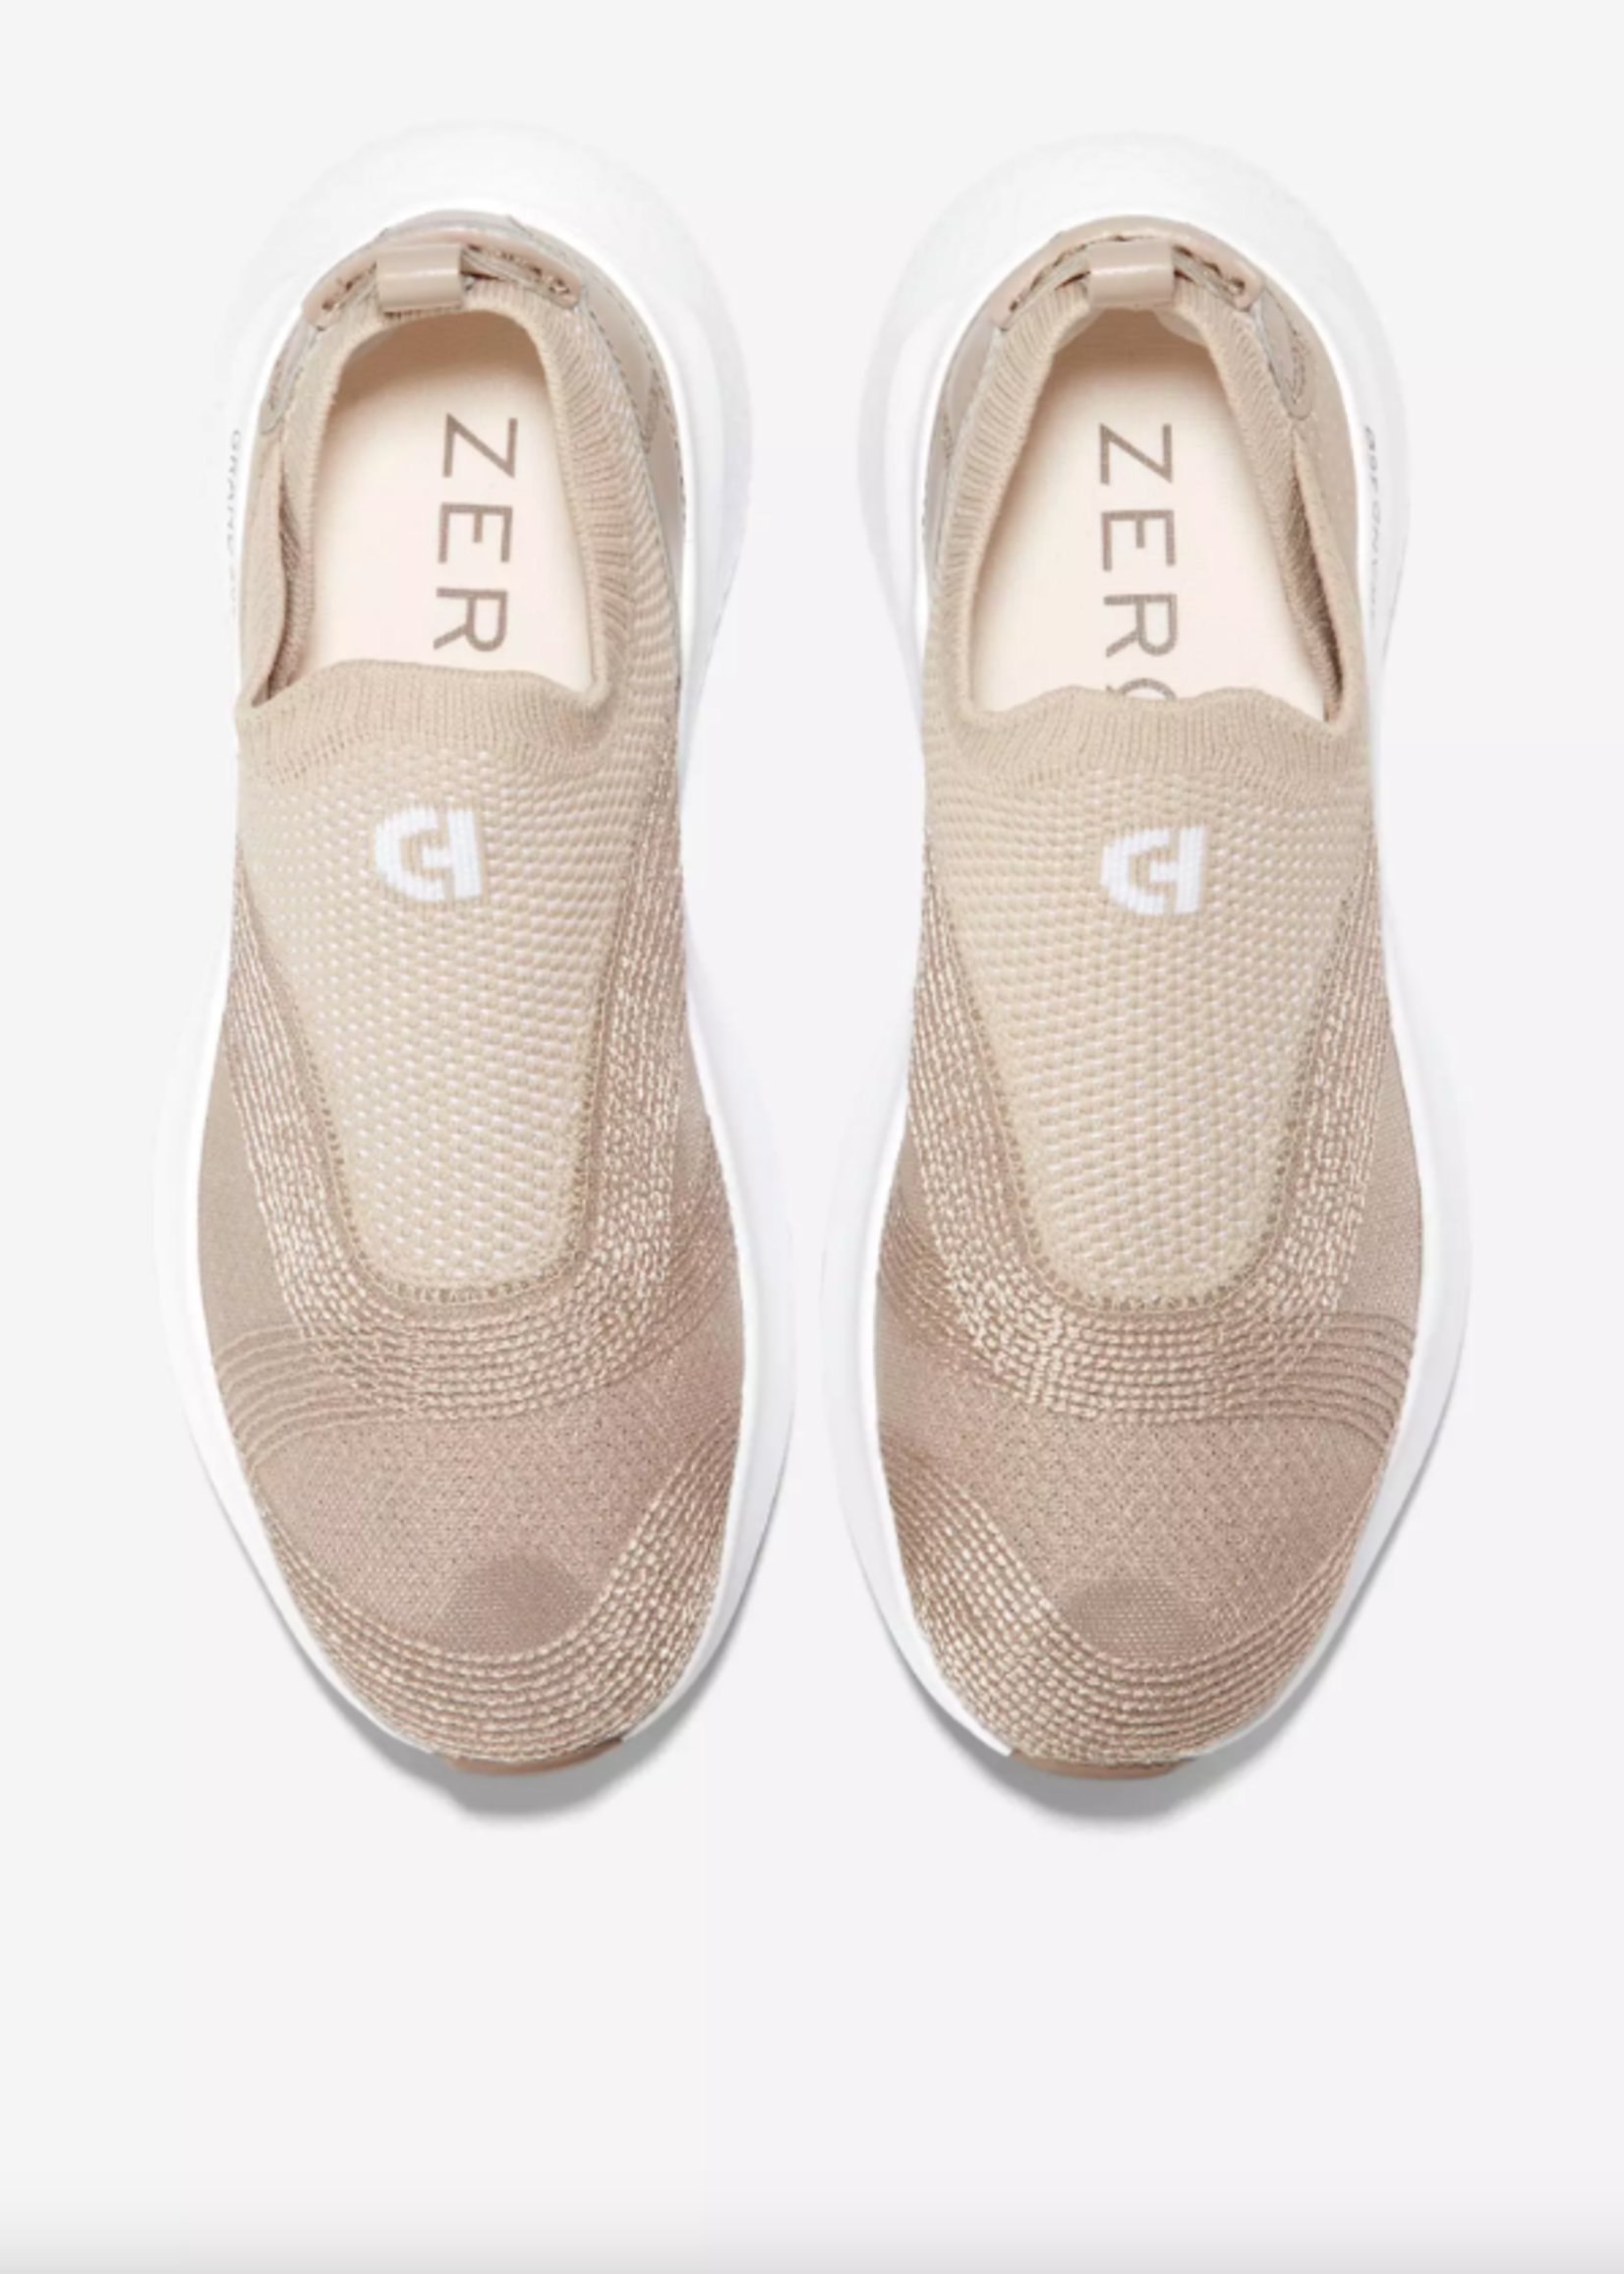 COLE HAAN ZG MOTION CONNECT